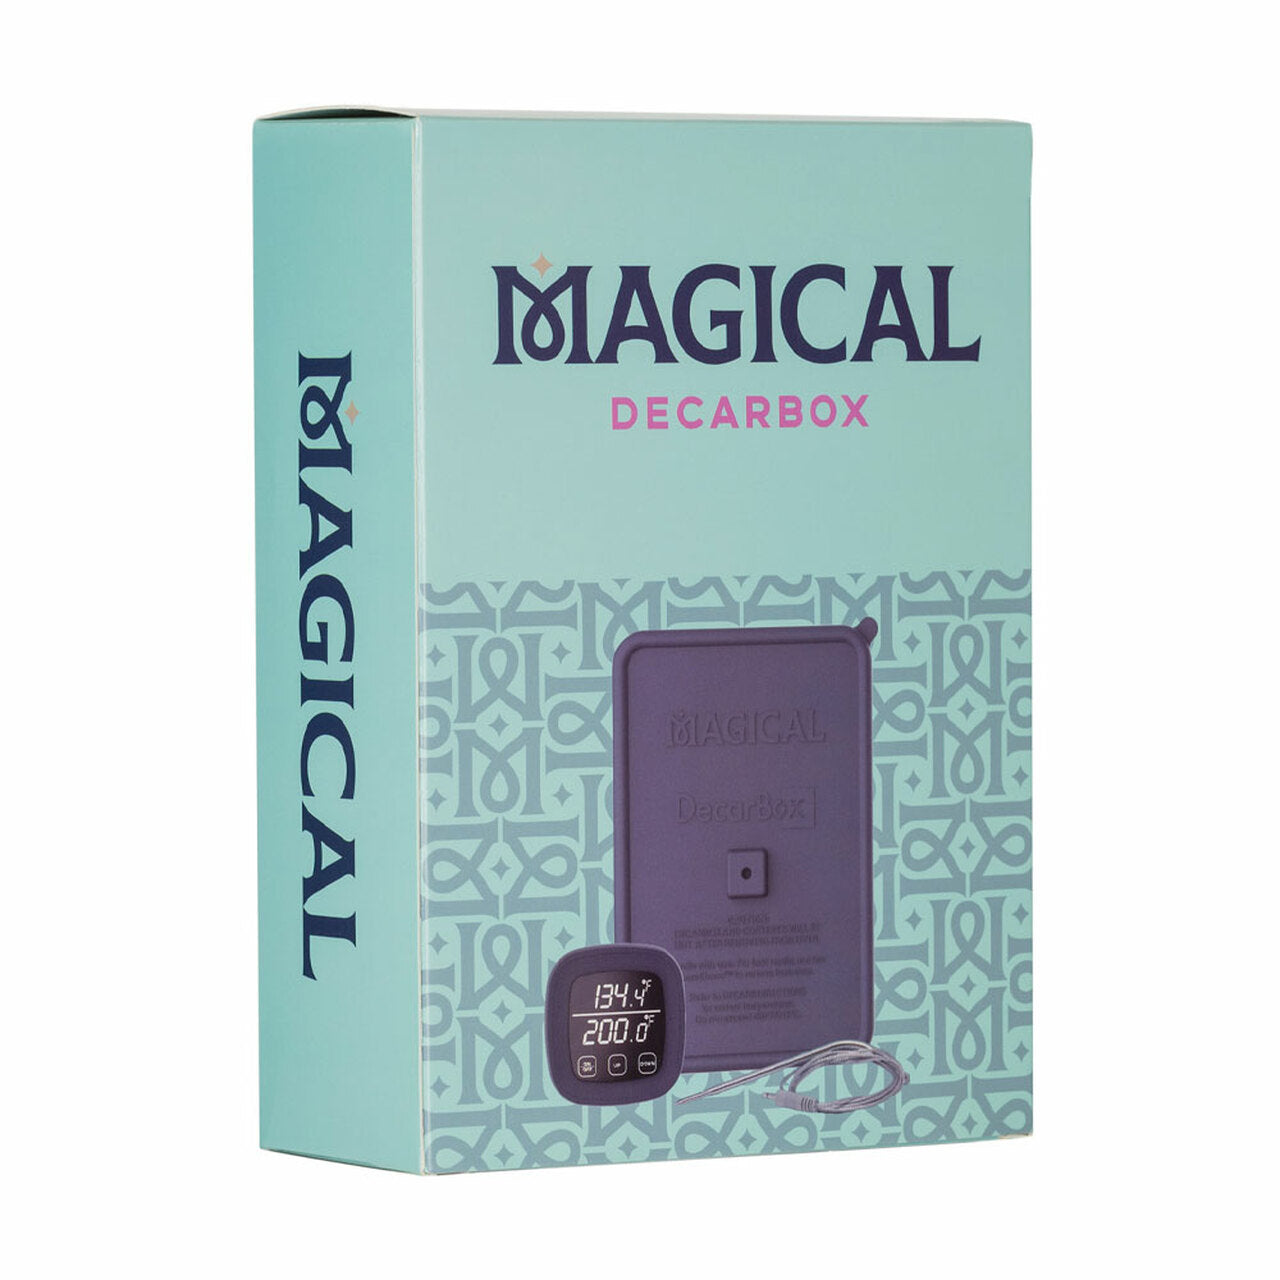 Magical Butter Decarbox